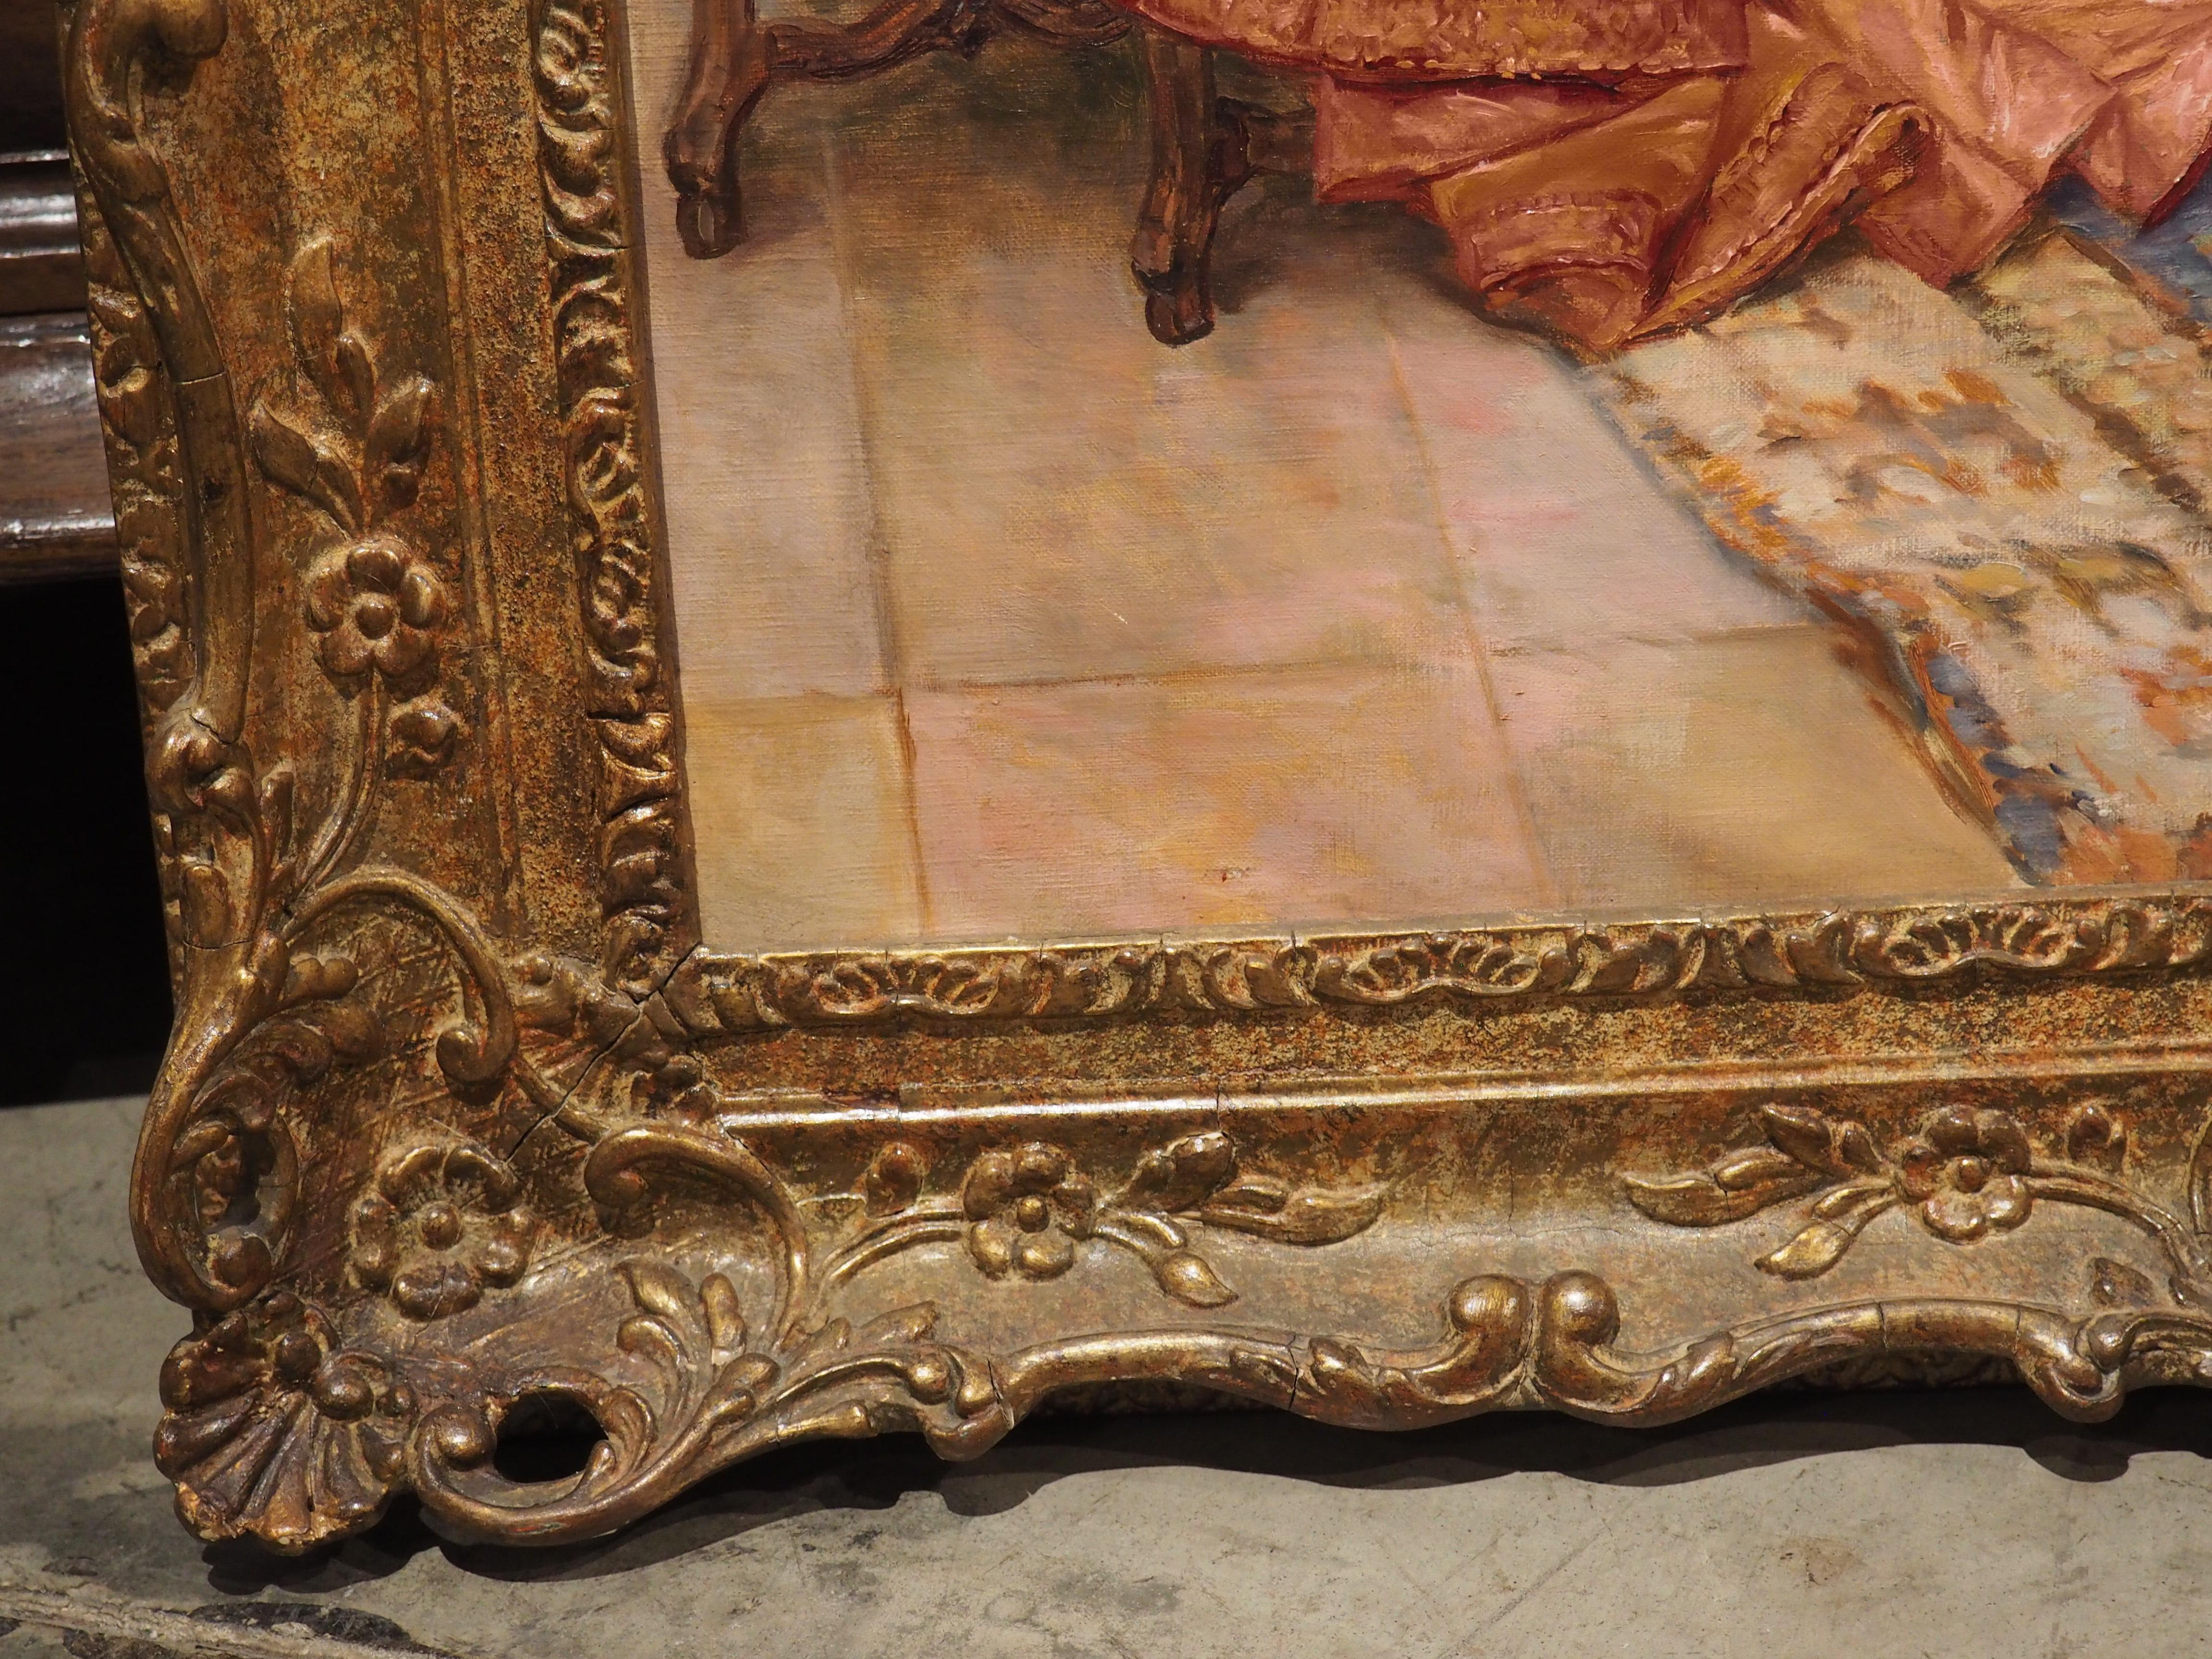 The subject of this antique oil painting is a man enjoying lunch, as emphasized by the brass placard near the bottom of the giltwood frame that reads Dejeuner (“lunch”), with the artist’s name “A de Andreis”. Based on the man’s style of dress, it